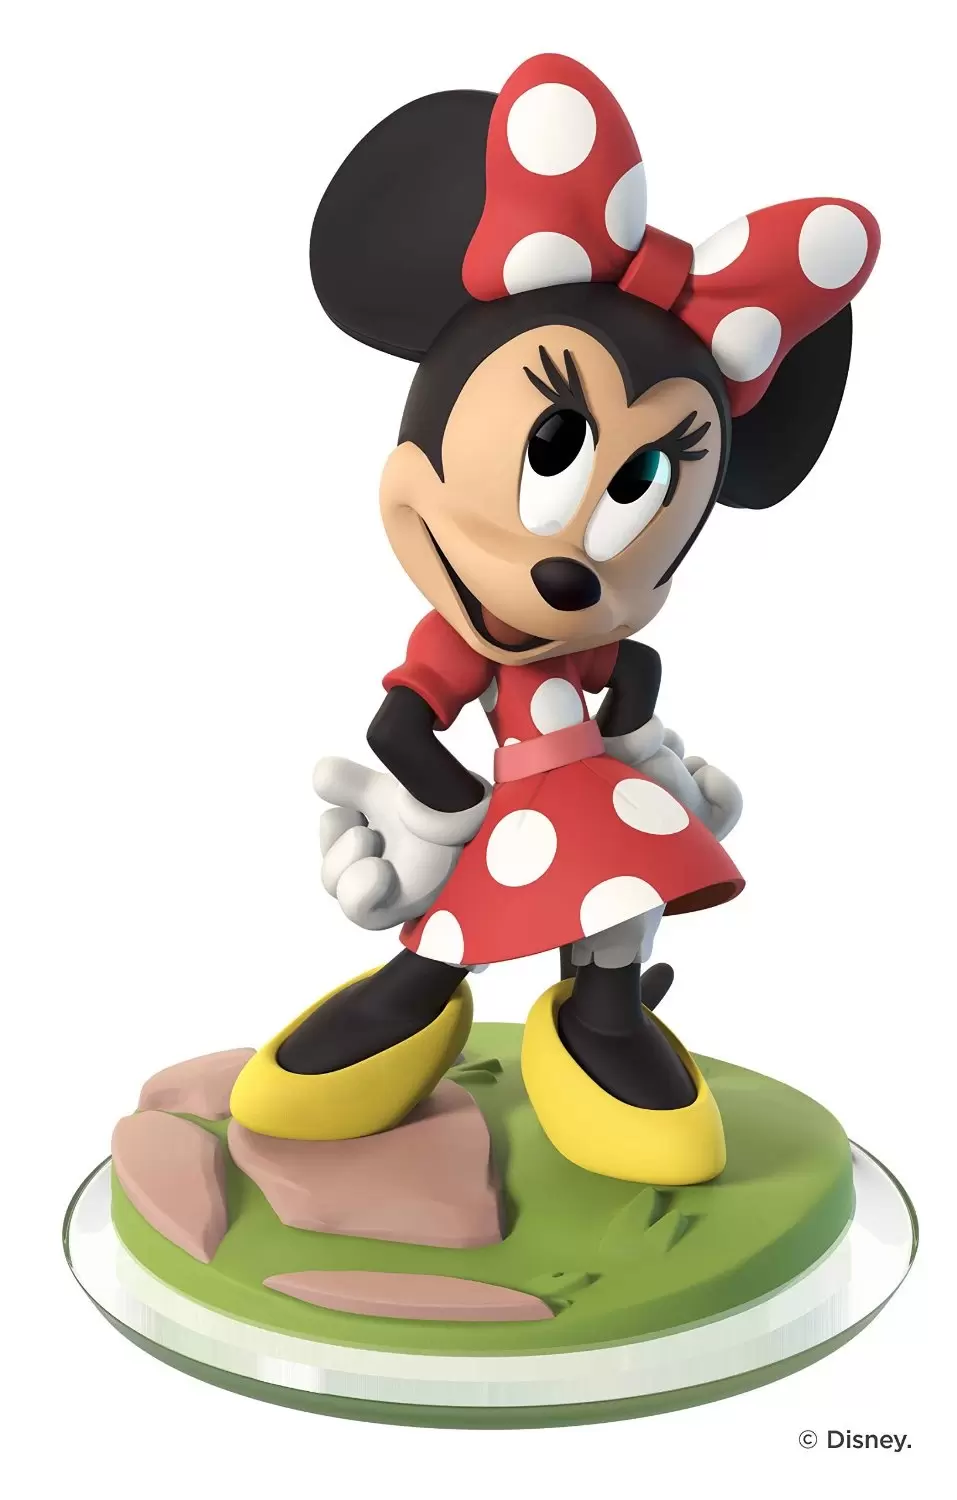 Disney Infinity Action figures - Minnie Mouse